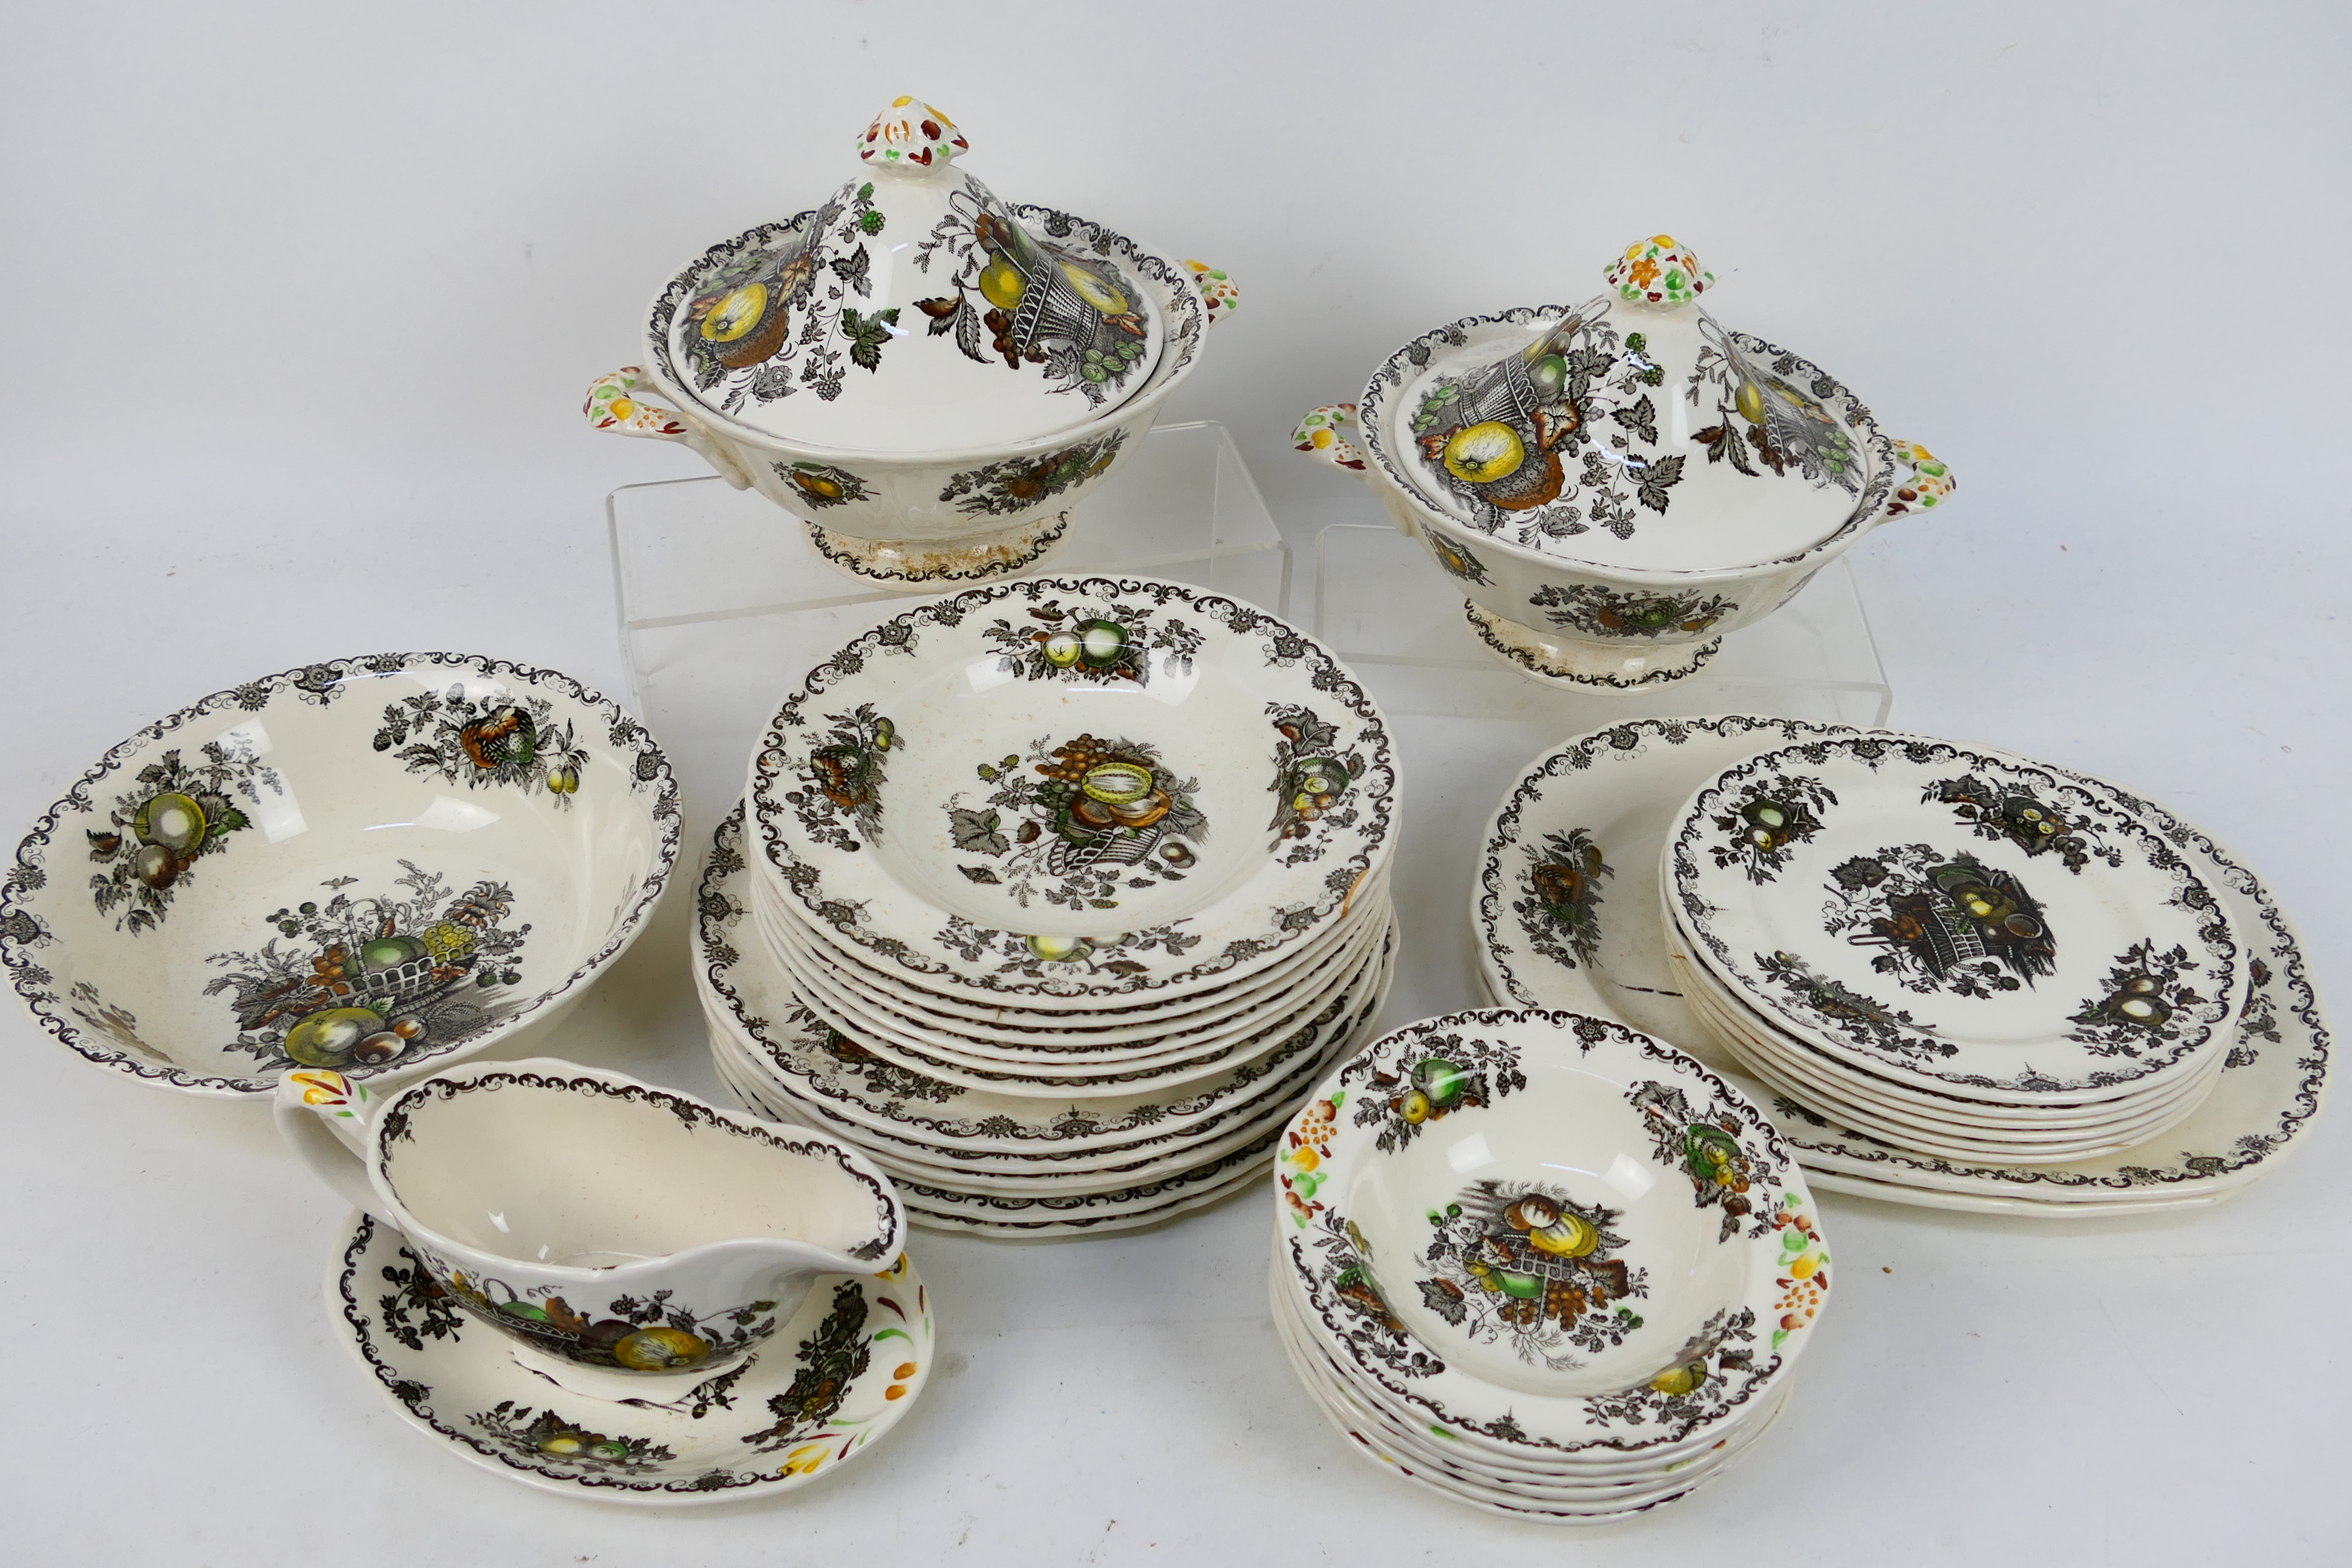 Masons Ironstone - A collection of dinner wares in the Fruit Basket pattern, 33 pieces total.